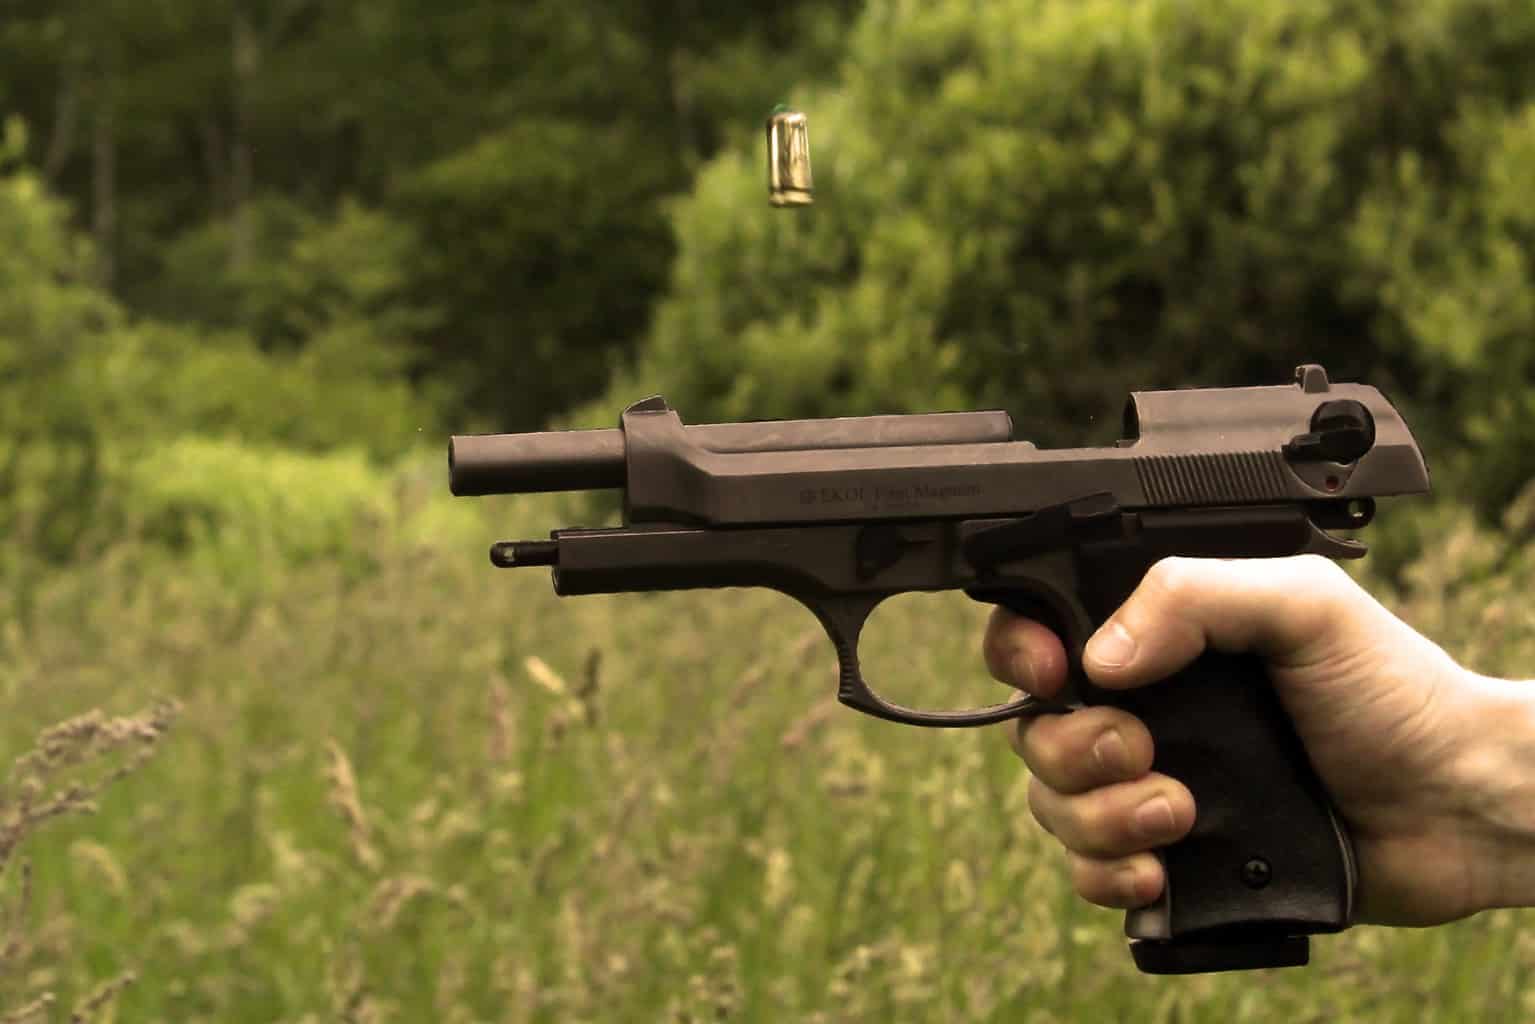 A pistol being shot with a flying bullet